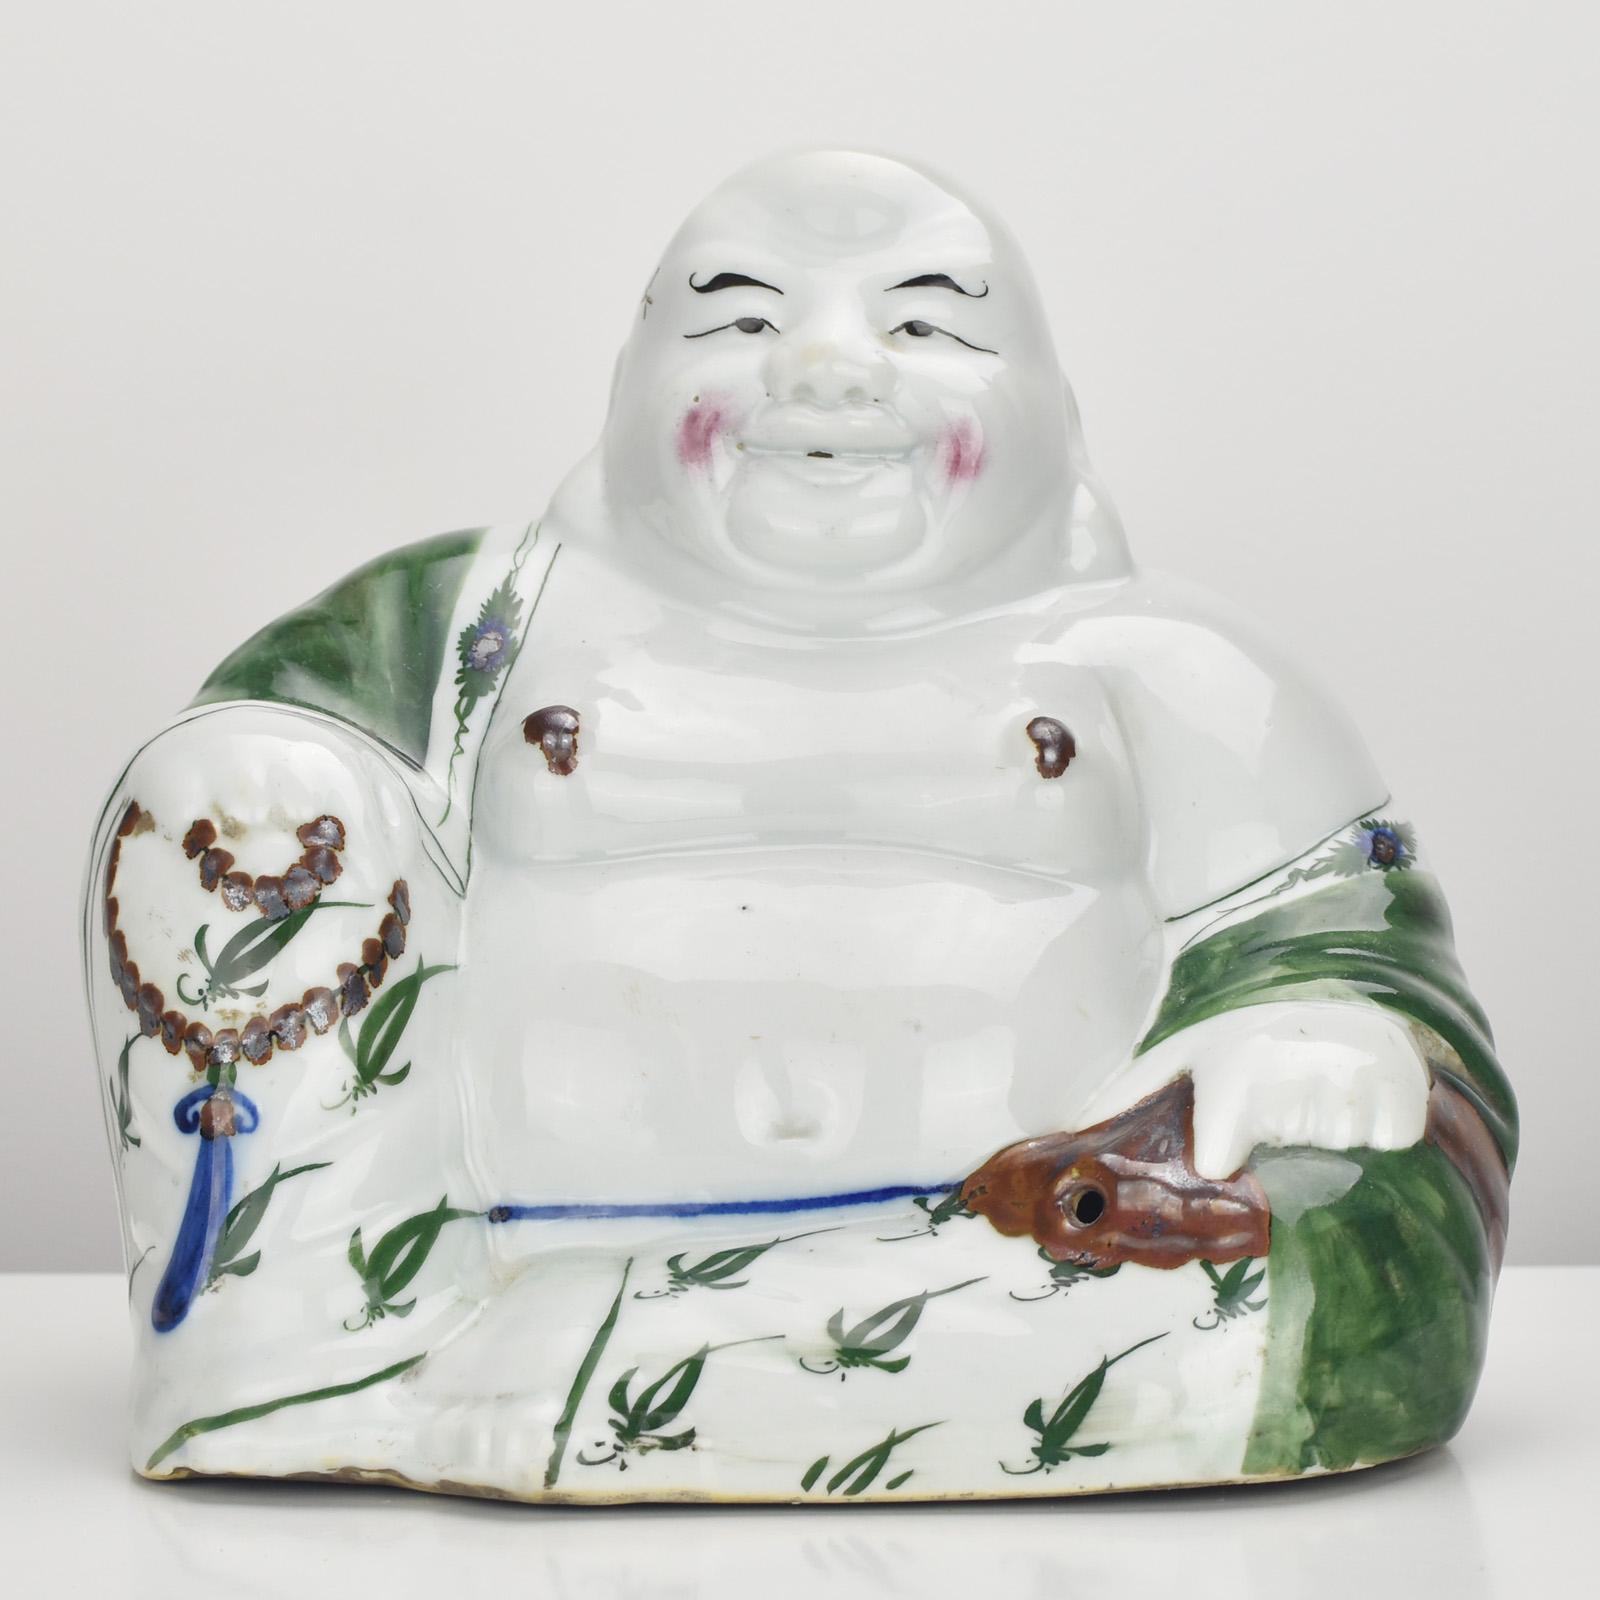 The unusual antique ca. 1920 Qing Chinese porcelain Laughing Buddha is a remarkable and exquisite piece of art that exudes charm and cultural significance. The statue features the iconic Laughing Buddha, also known as Budai or Hotei, a beloved